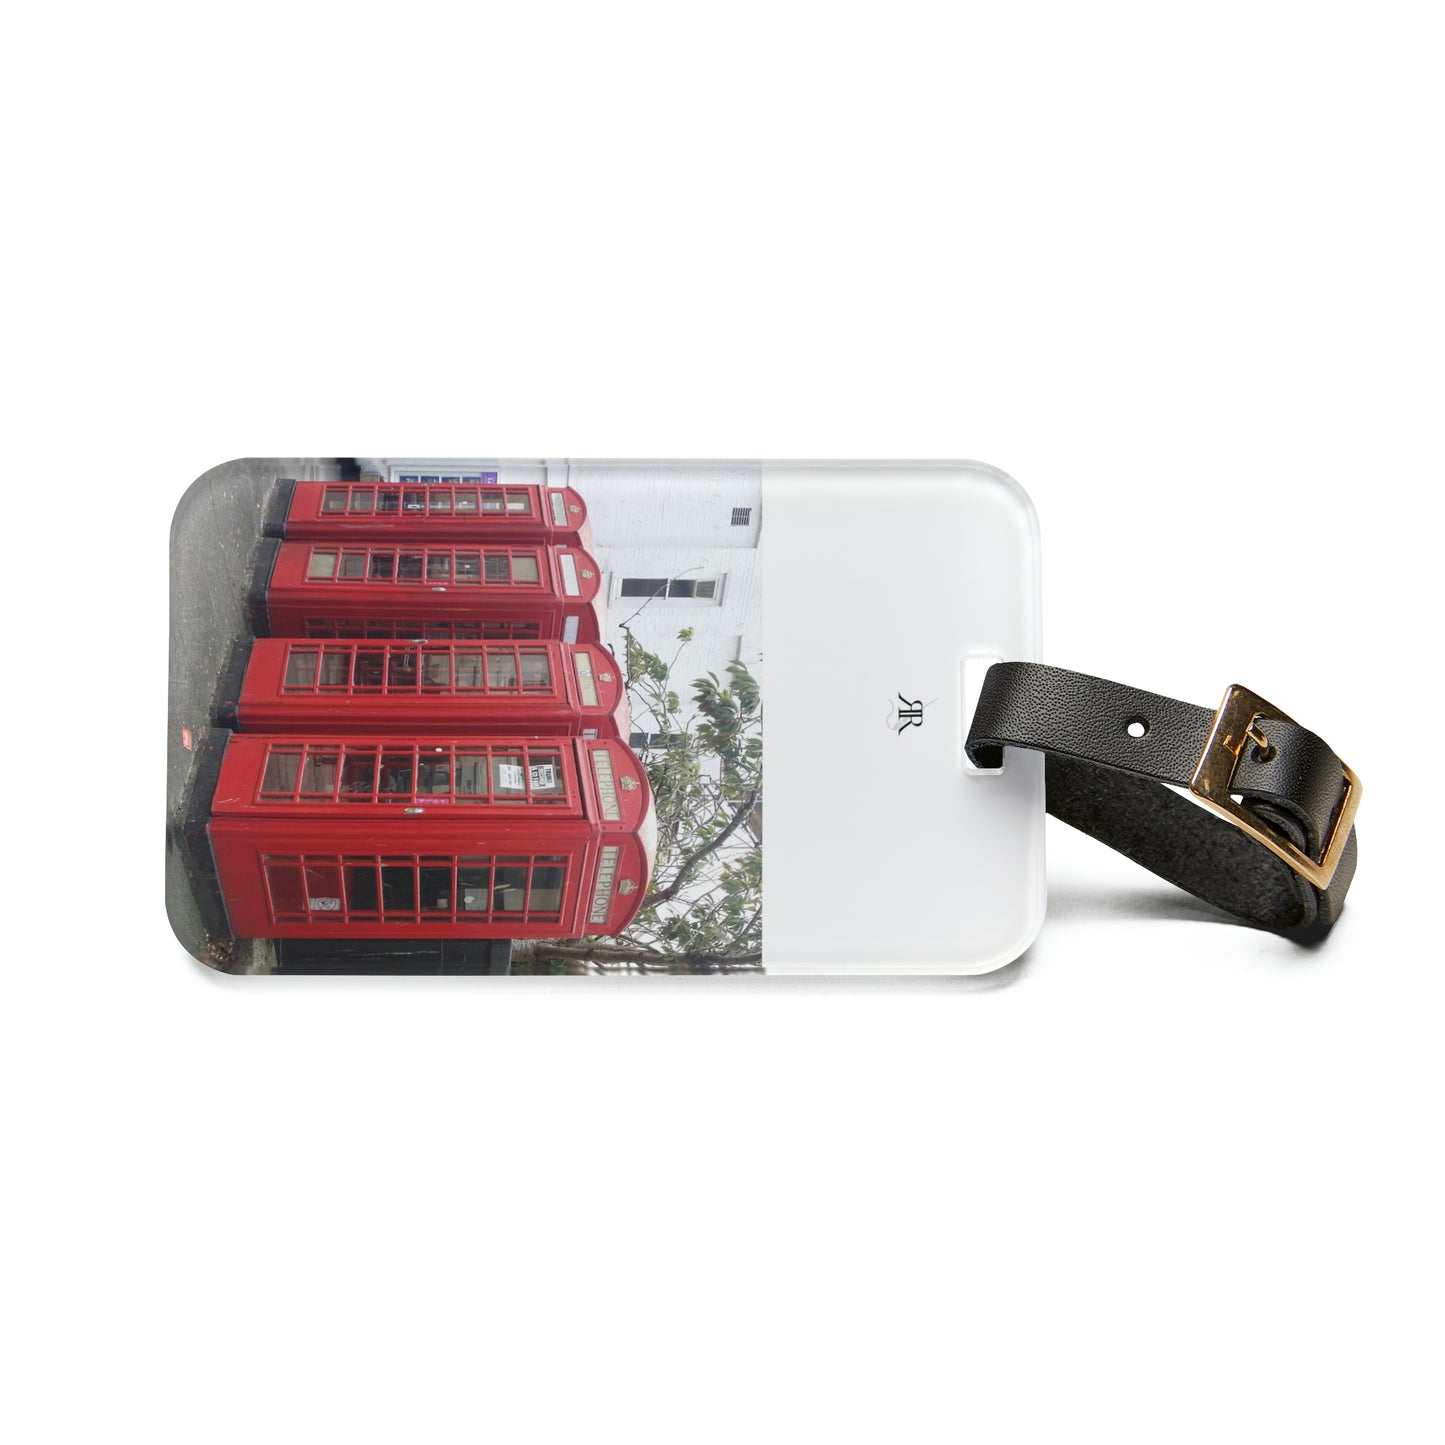 British Phone Booths Luggage Tag